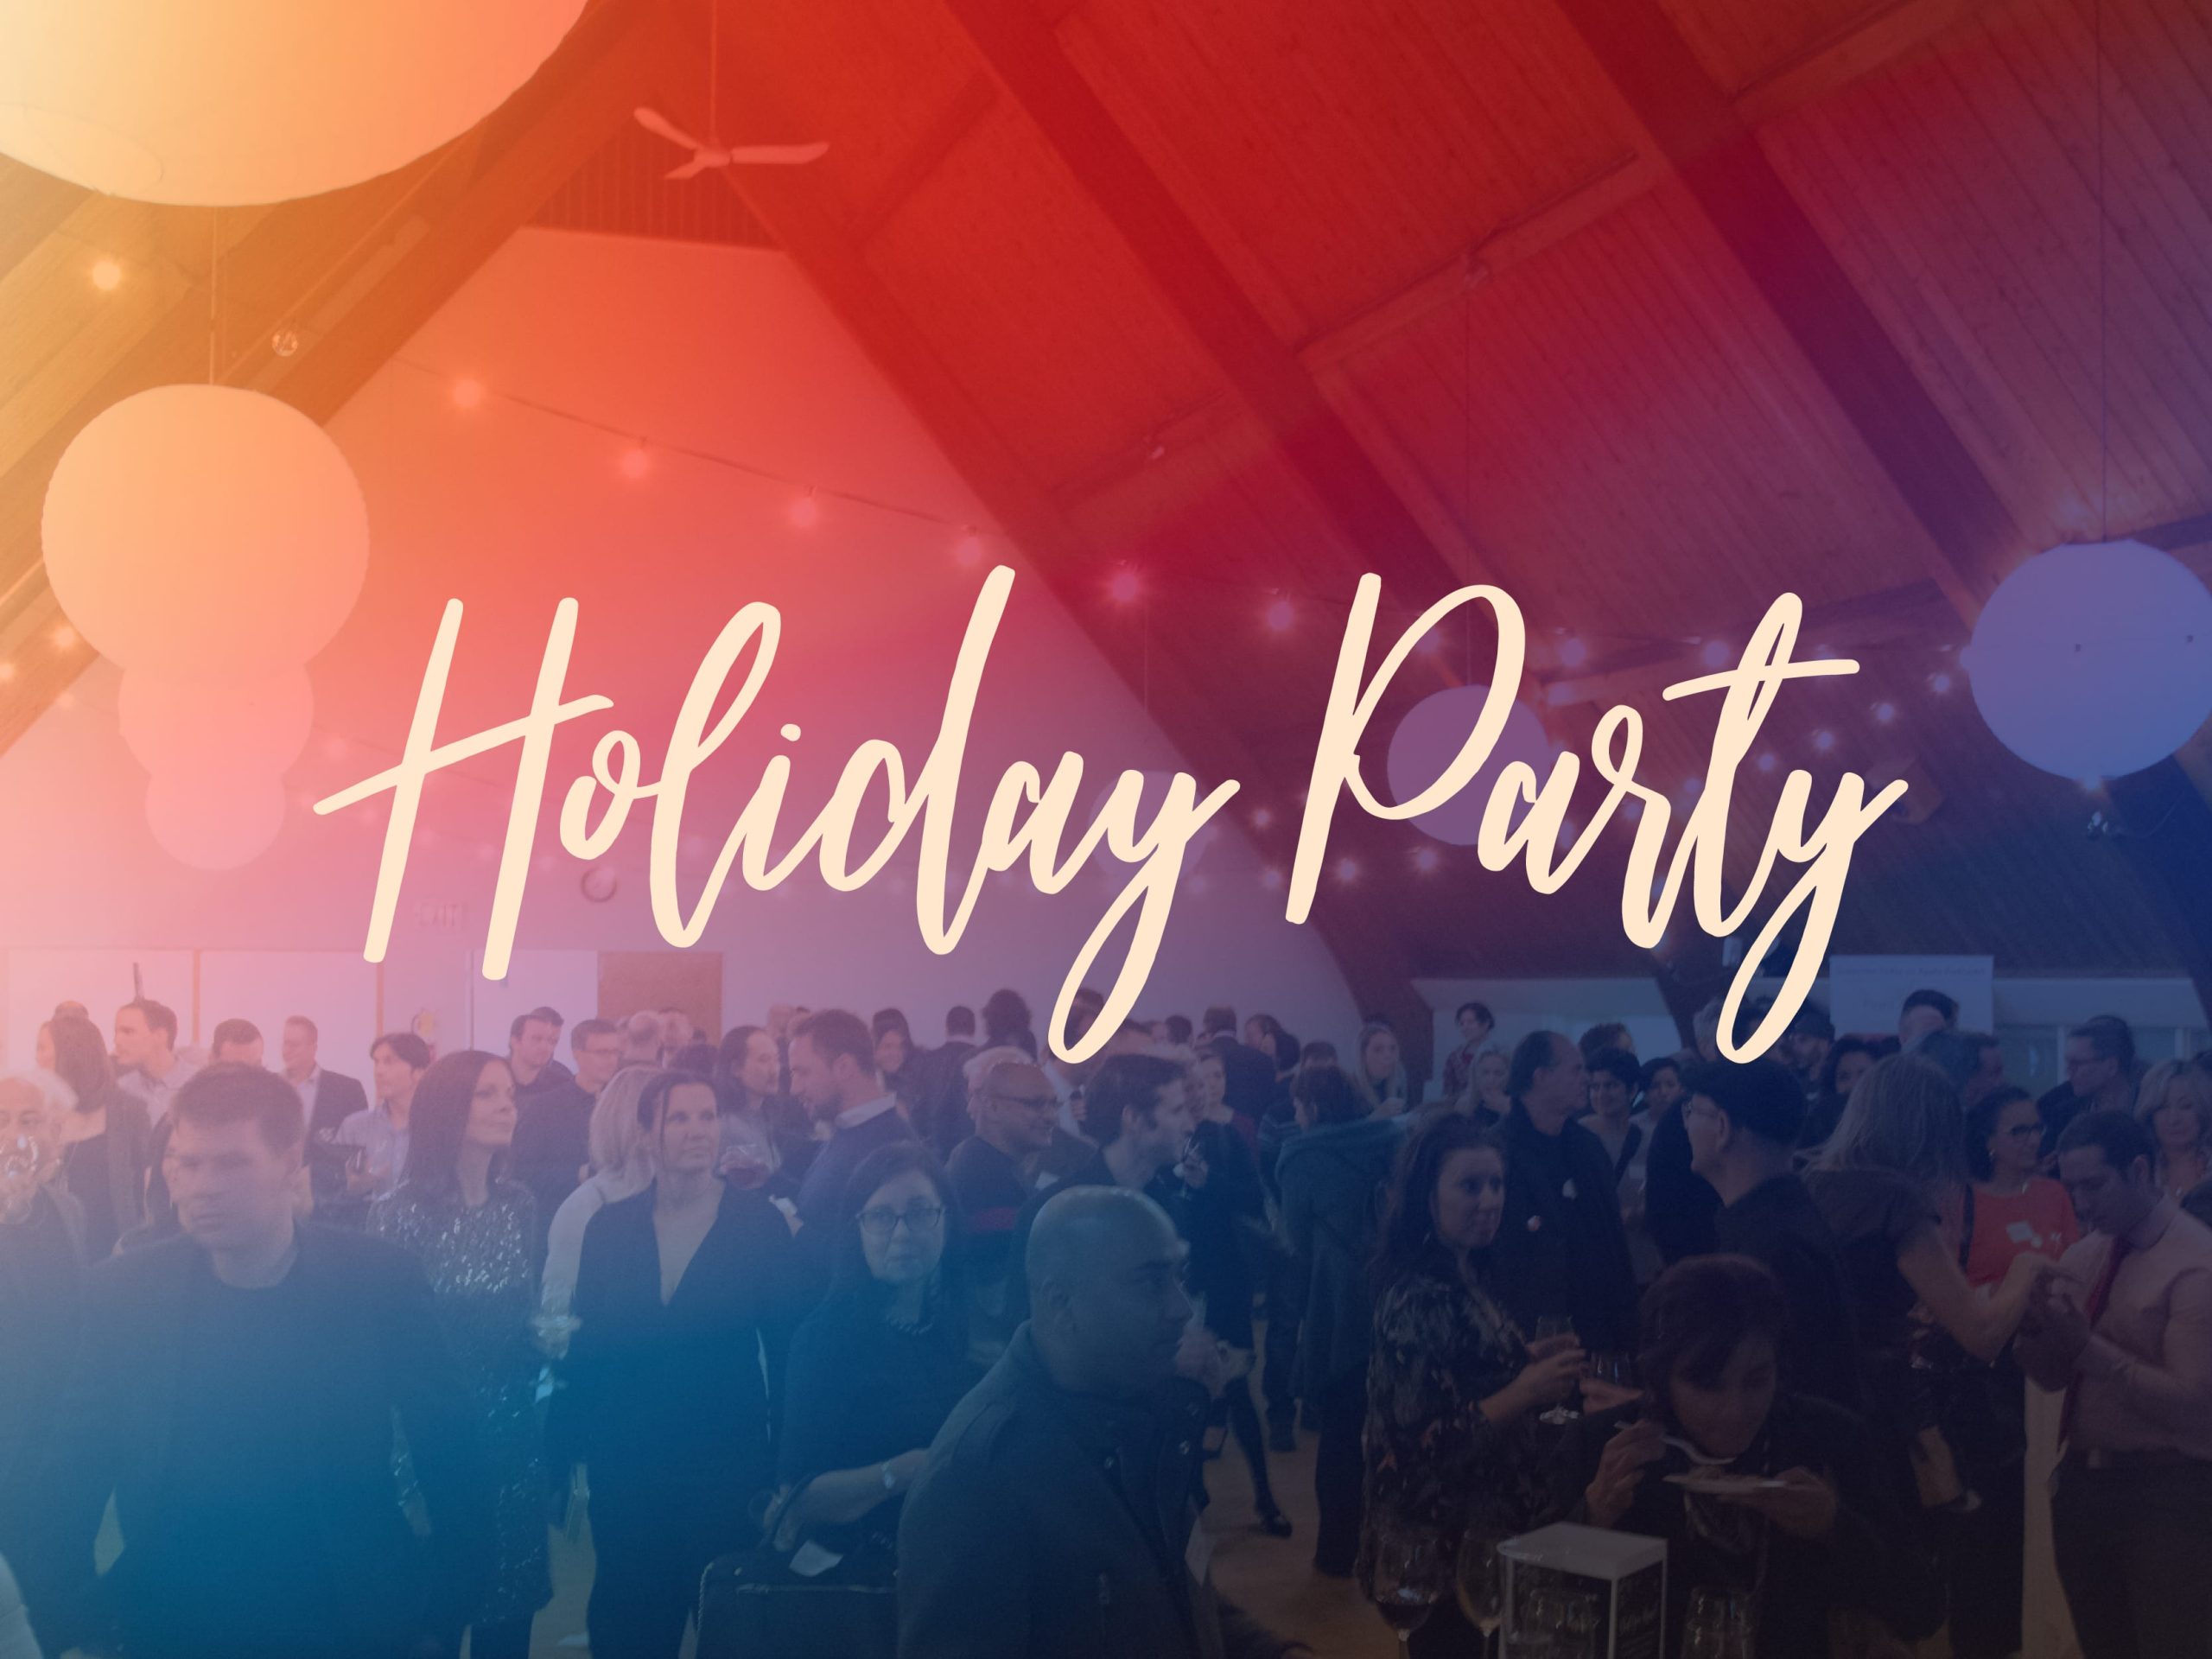 Animal Justice holiday party banner